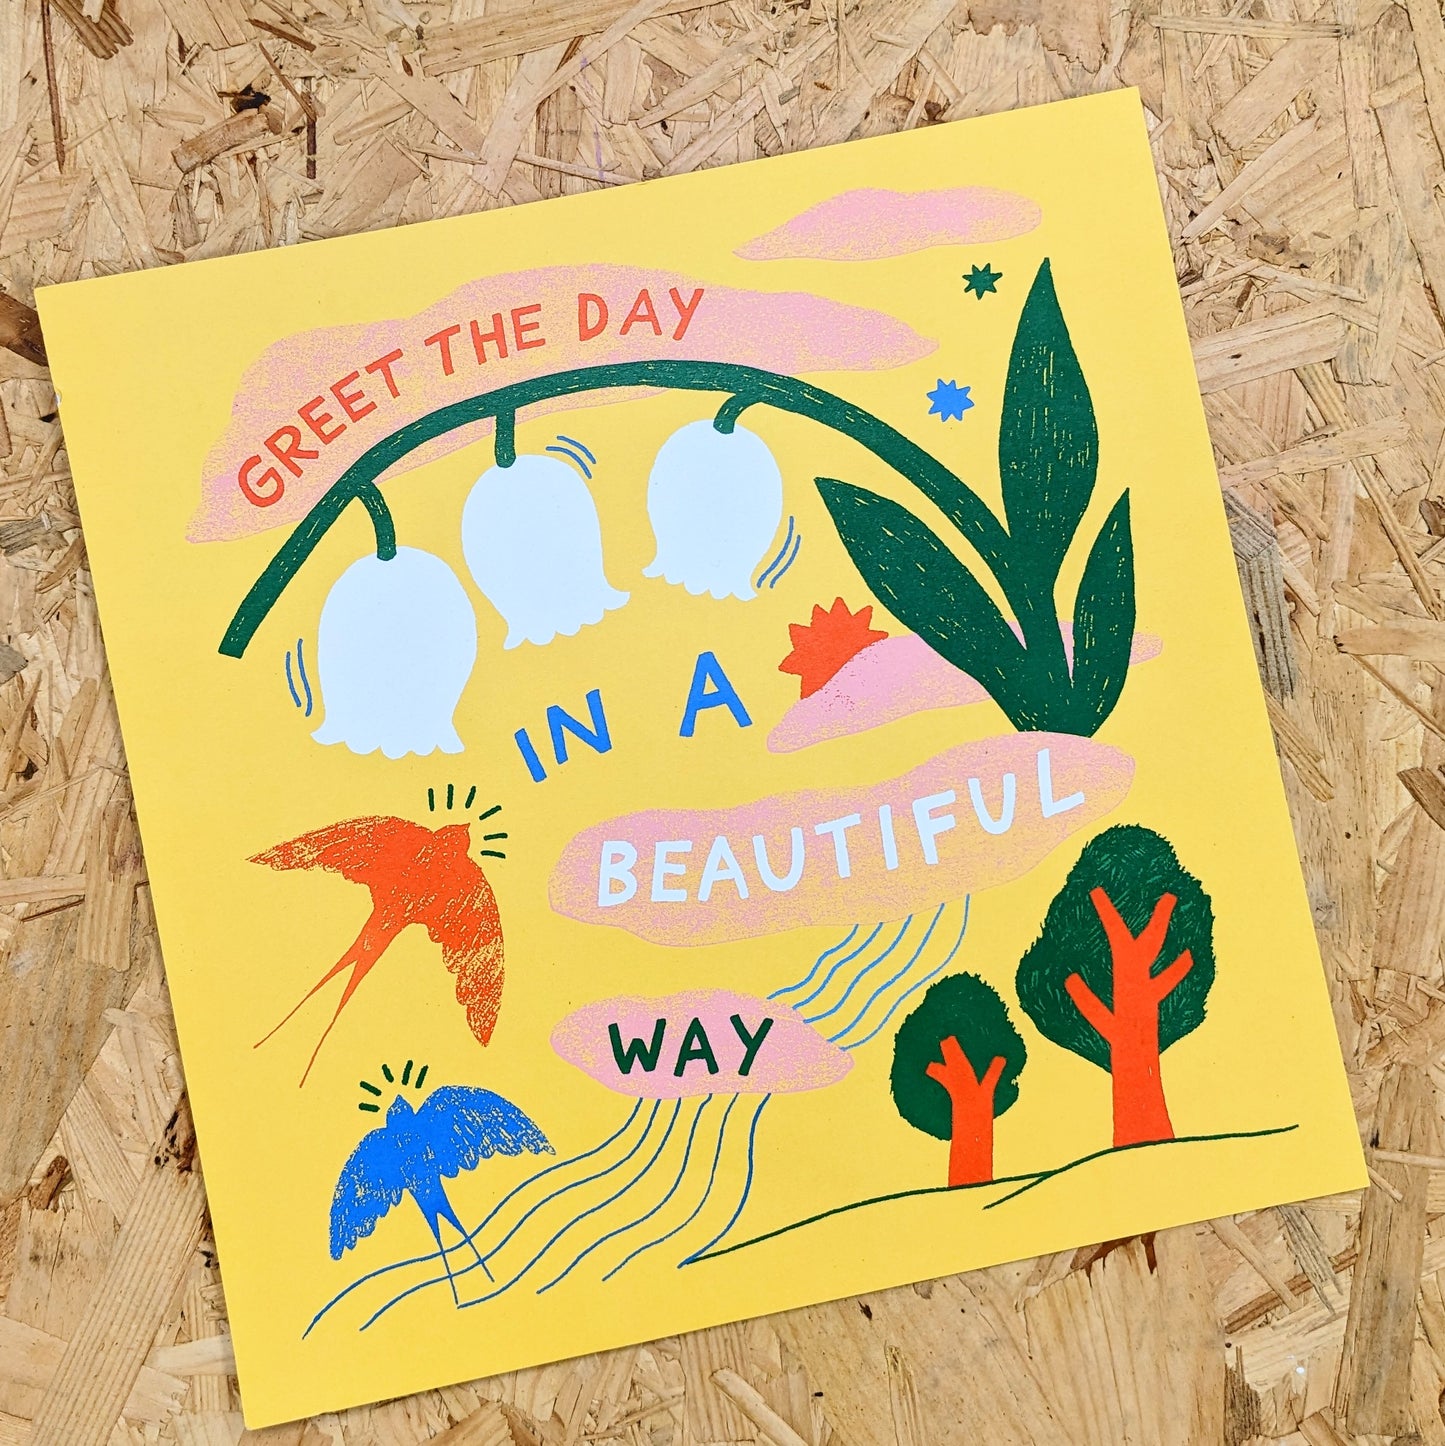 A3 Greet the day in a beautiful way print